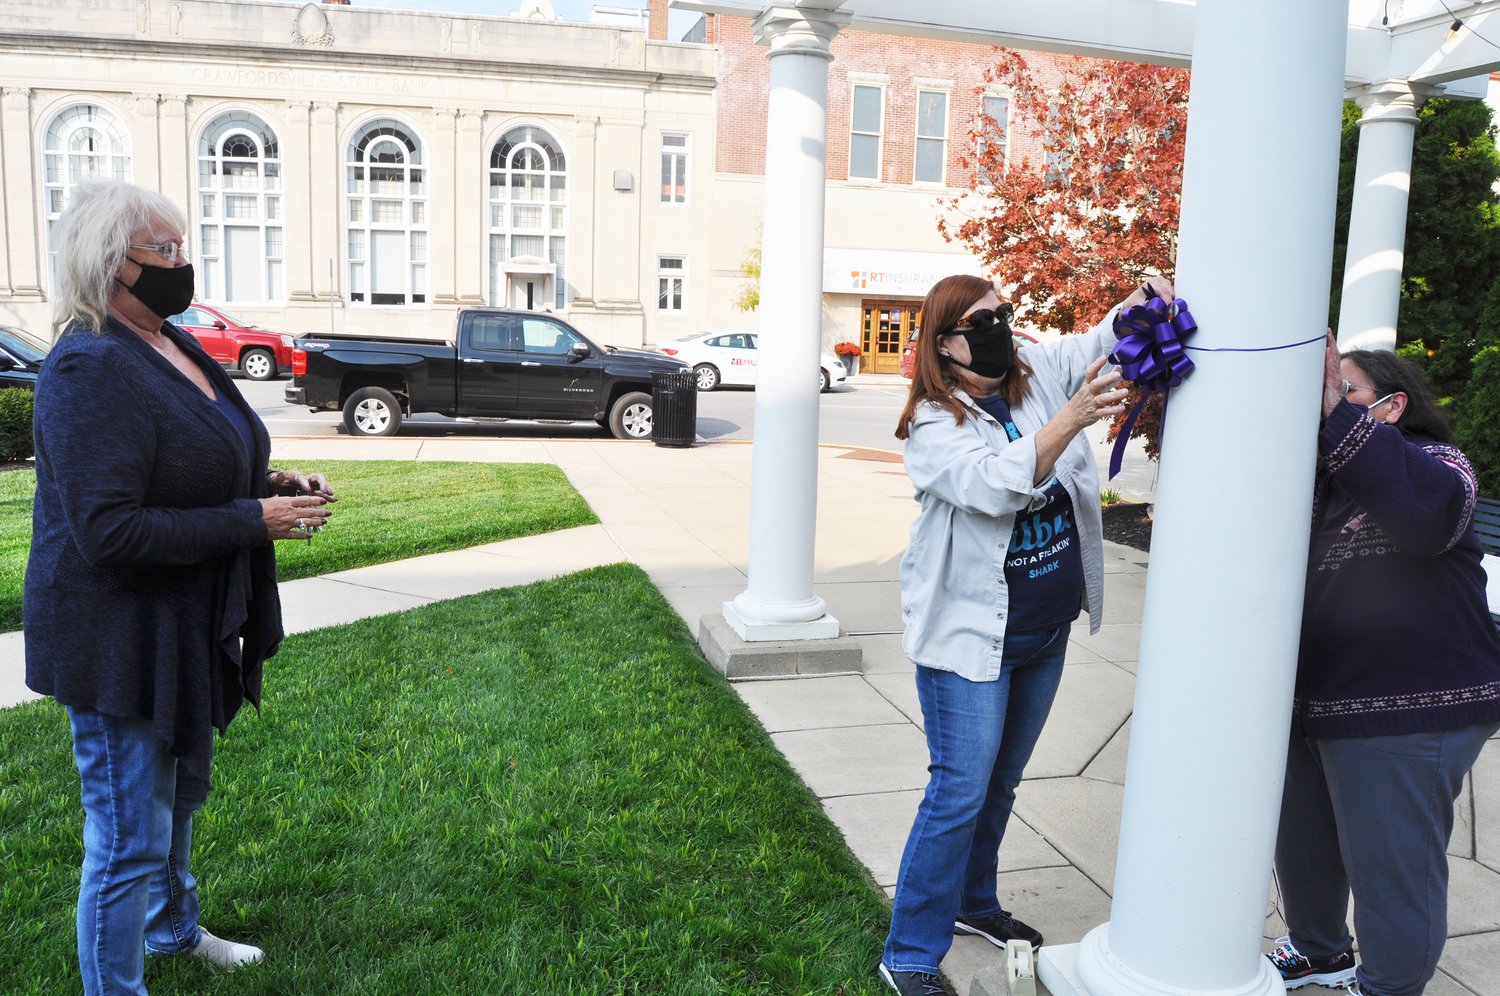 Joyce Baker, left, watches Deb Lee and Kathy Walker tie a purple ribbon representing domestic violence awareness at Marie Canine Plaza Tuesday. October is Domestic Violence Awareness Month.